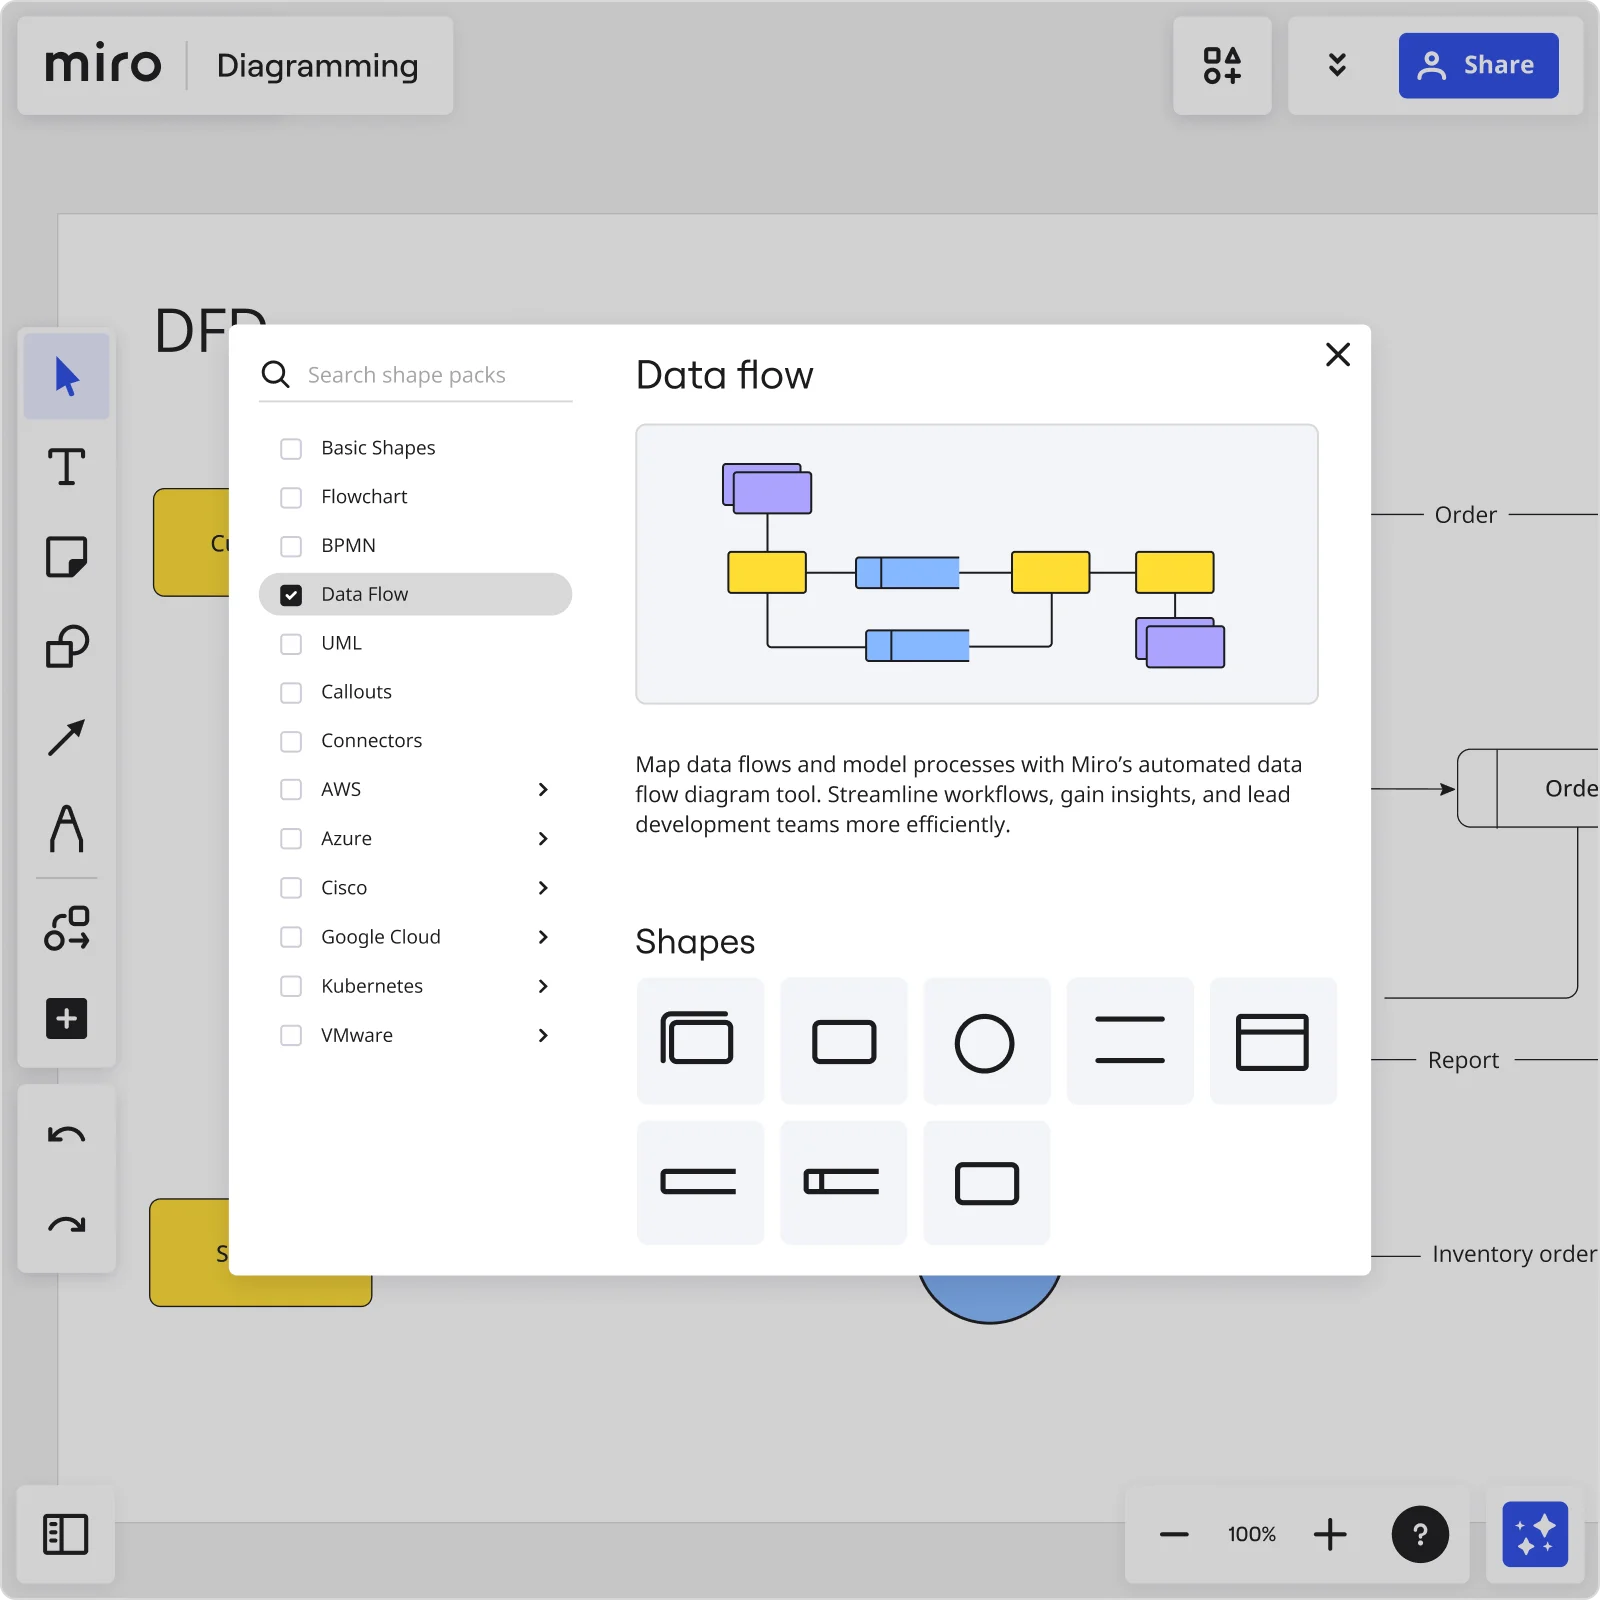 An image showing how to use Miro's data flow diagram tool